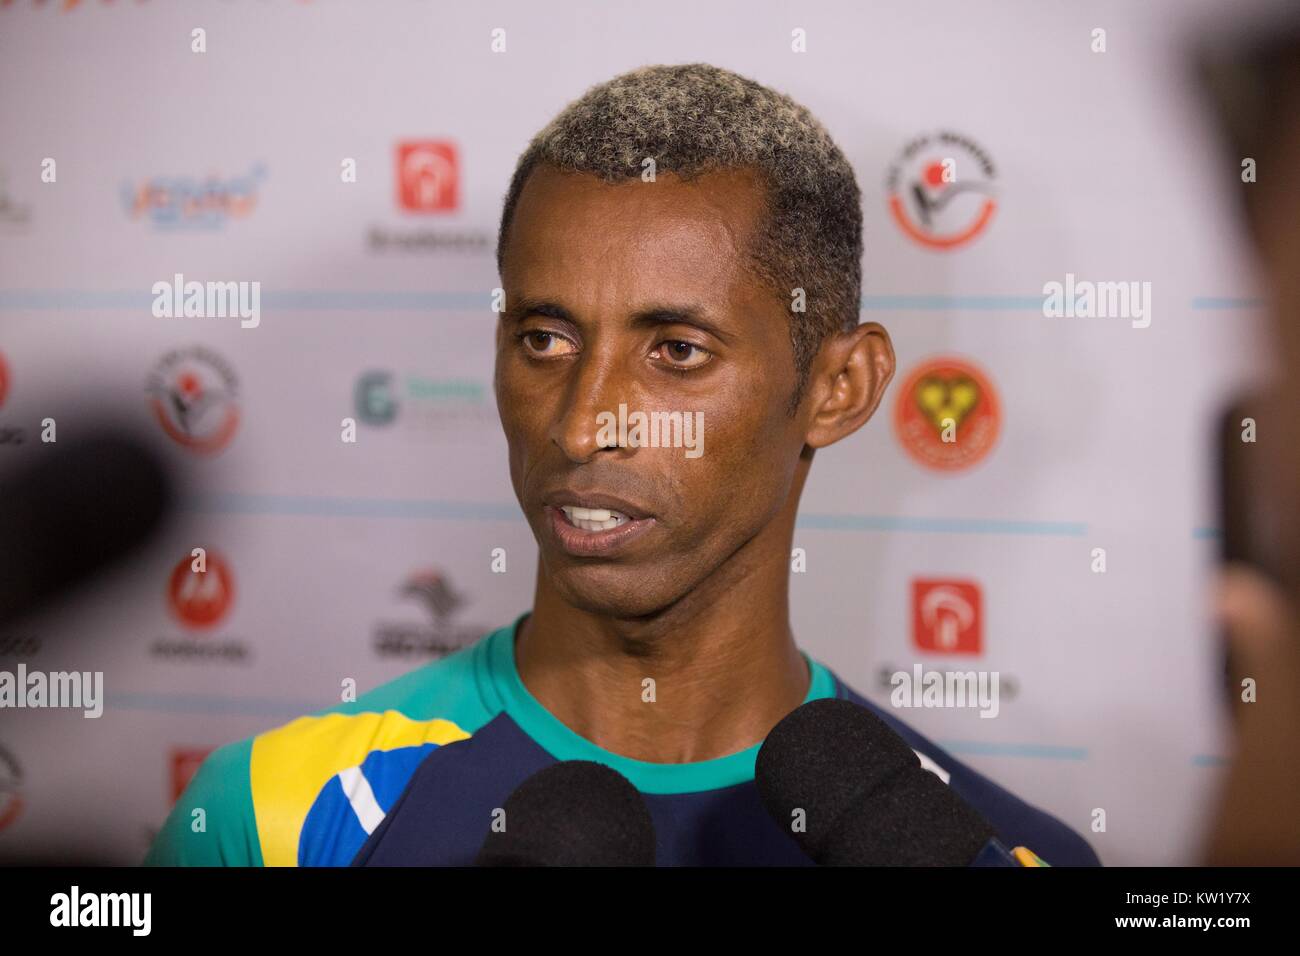 December 29, 2017 - Runner GIOVANI DOS SANTOS (BRA) speaks during the 93st Sao Silvestre Road Race press conference on December 29, in Sao Paulo, Brazil. The race will take place on Sunday, 31. Credit: Paulo Lopes/ZUMA Wire/Alamy Live News Stock Photo